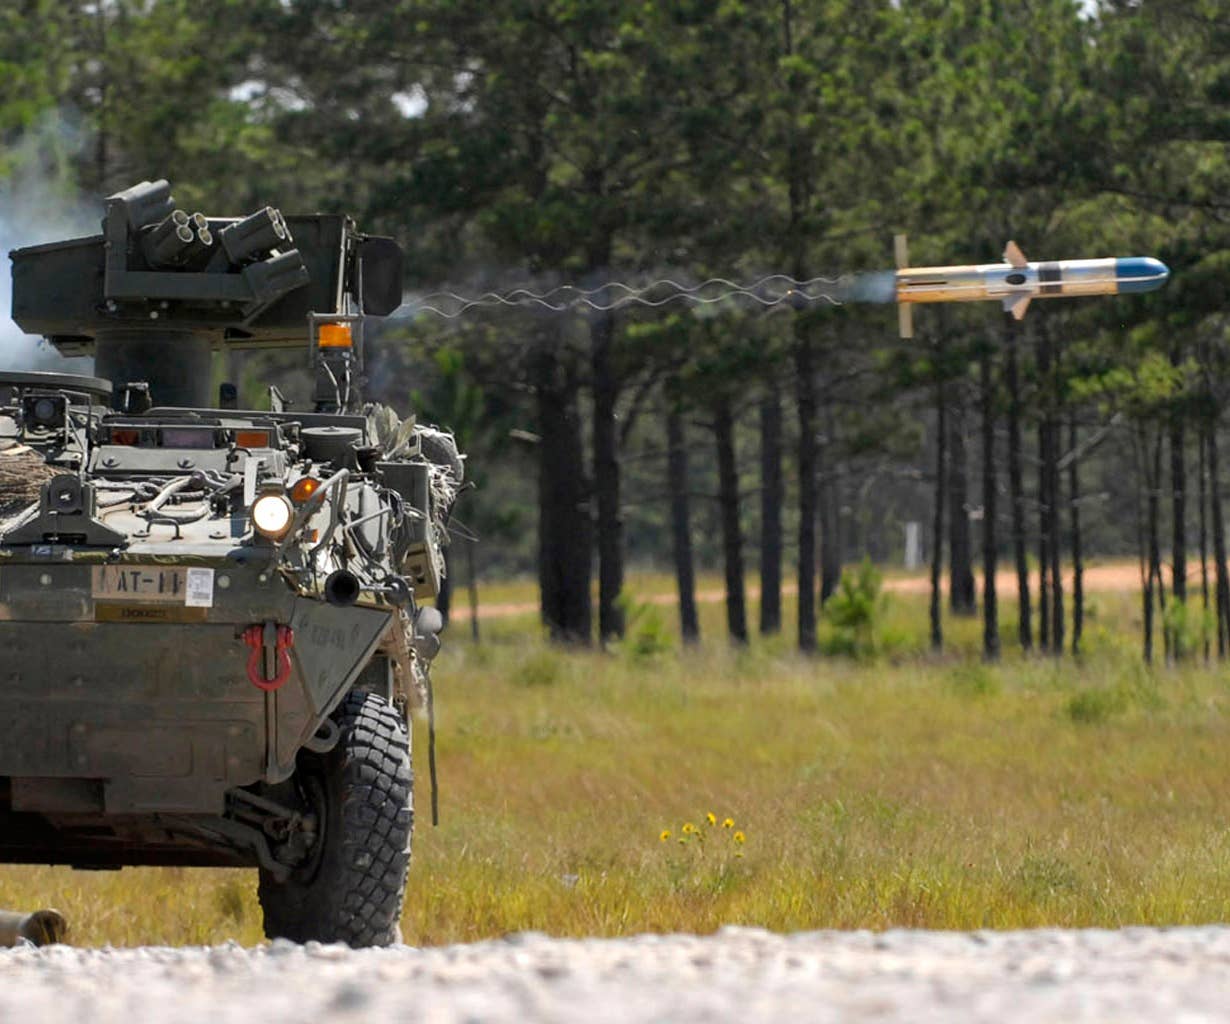 A Stryker vehicle belonging to the 4th Stryker Brigade Combat Team, 2nd Infantry Division, based out of Ft. Lewis, Wash., fires a tube-launched, optically-tracked, wire-guided missile at a range during the brigade's rotation through Fort Polk's Joint Readiness Training Center. (U.S. Army photo by Pfc. Victor J. Ayala)